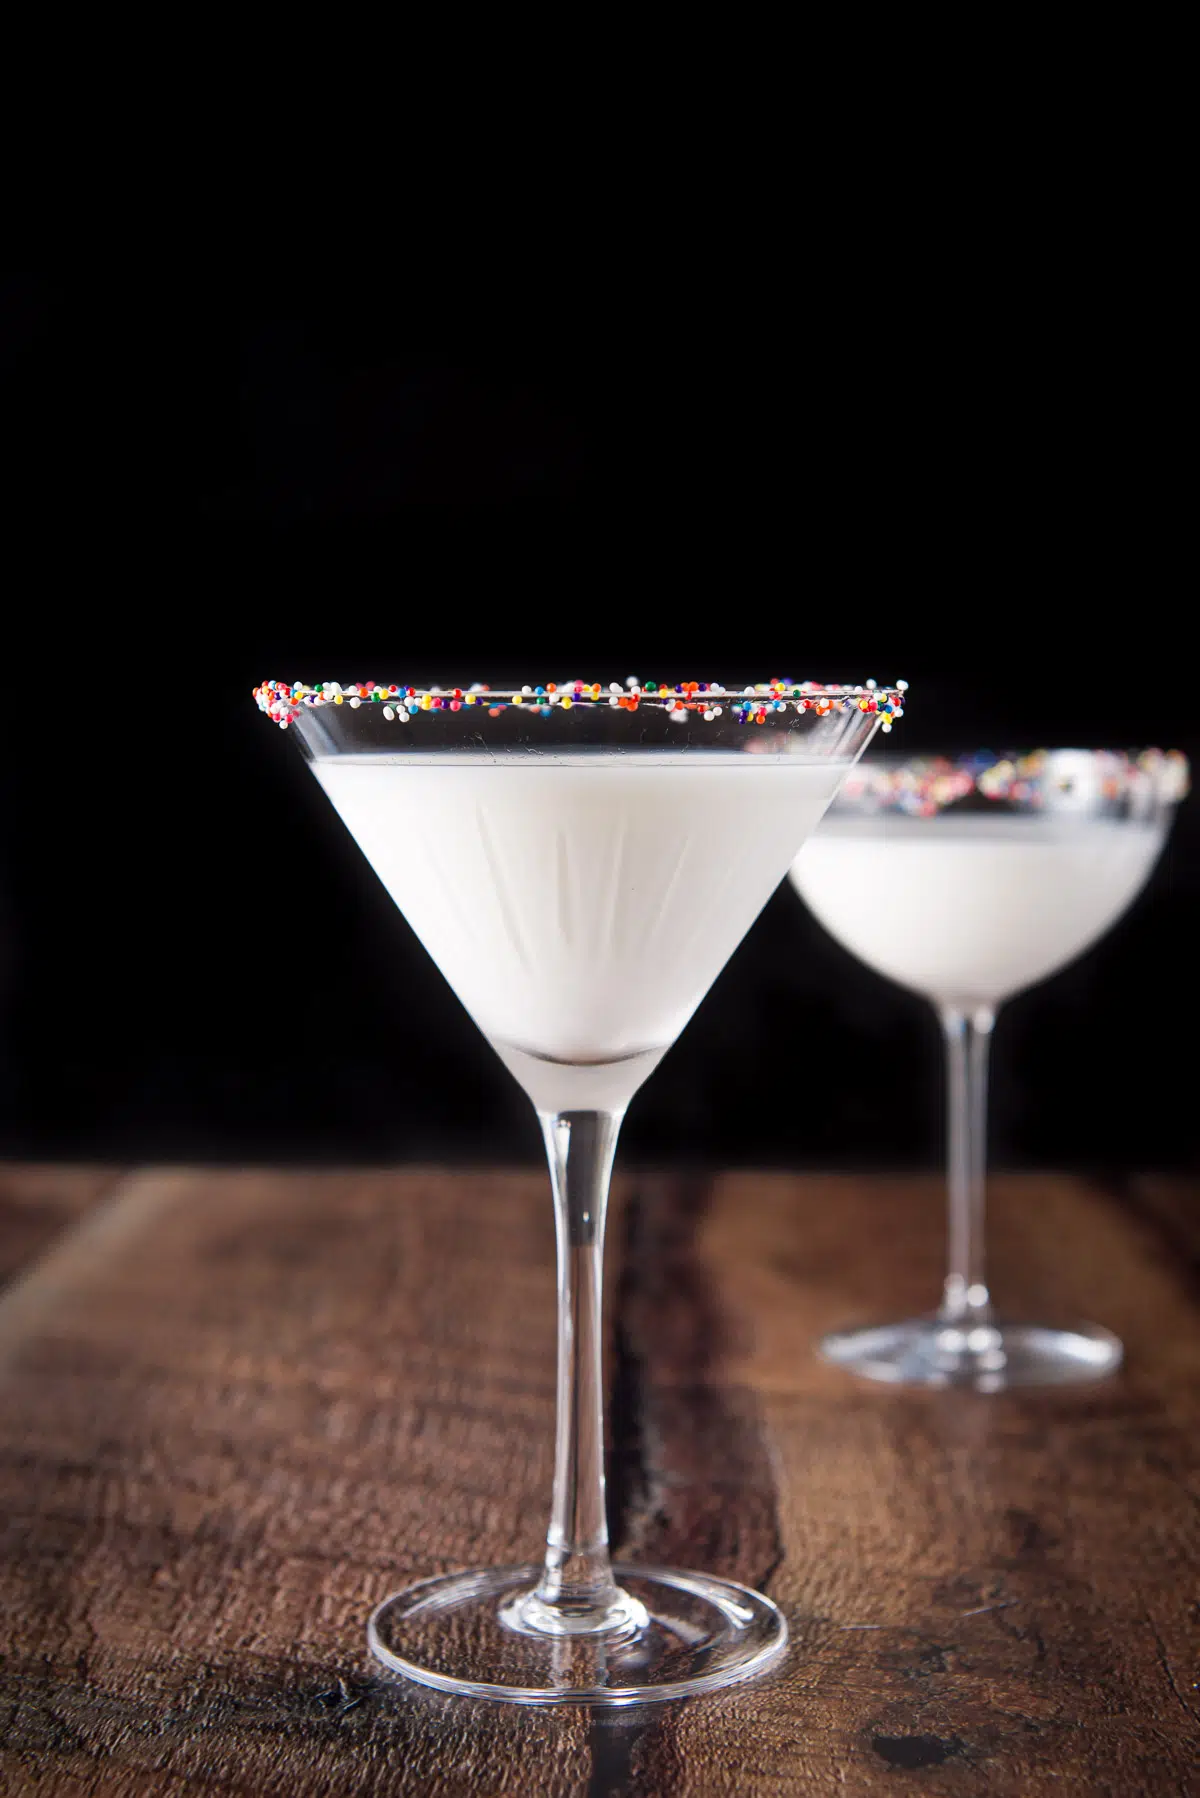 The classic martini glass in vertical view with the cream martini in it